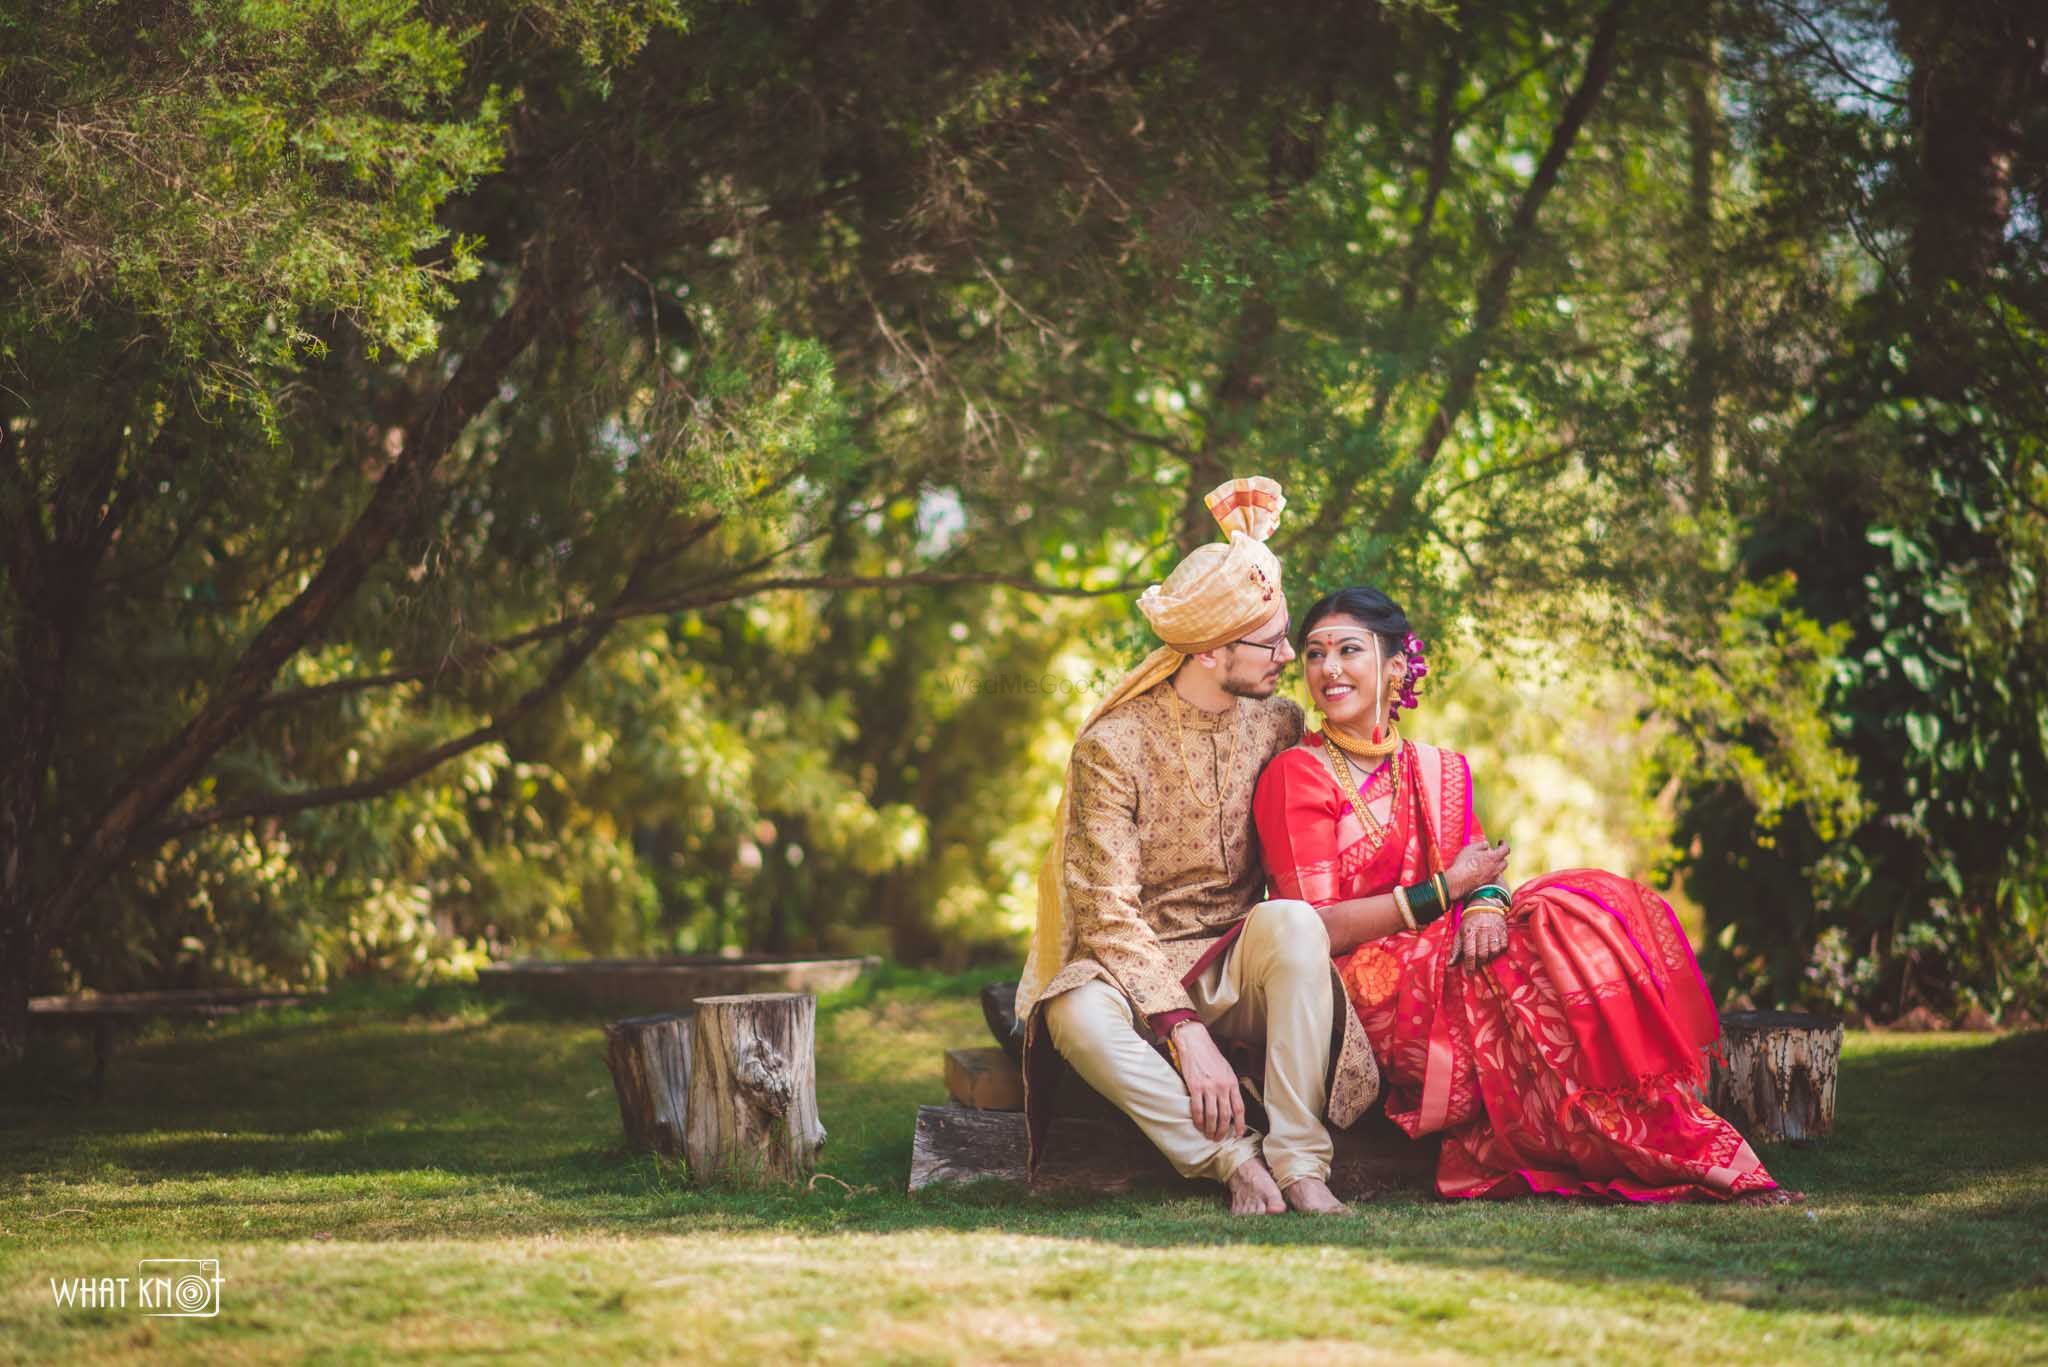 Trending Wedding Photoshoot Ideas for Capturing Your Special Day